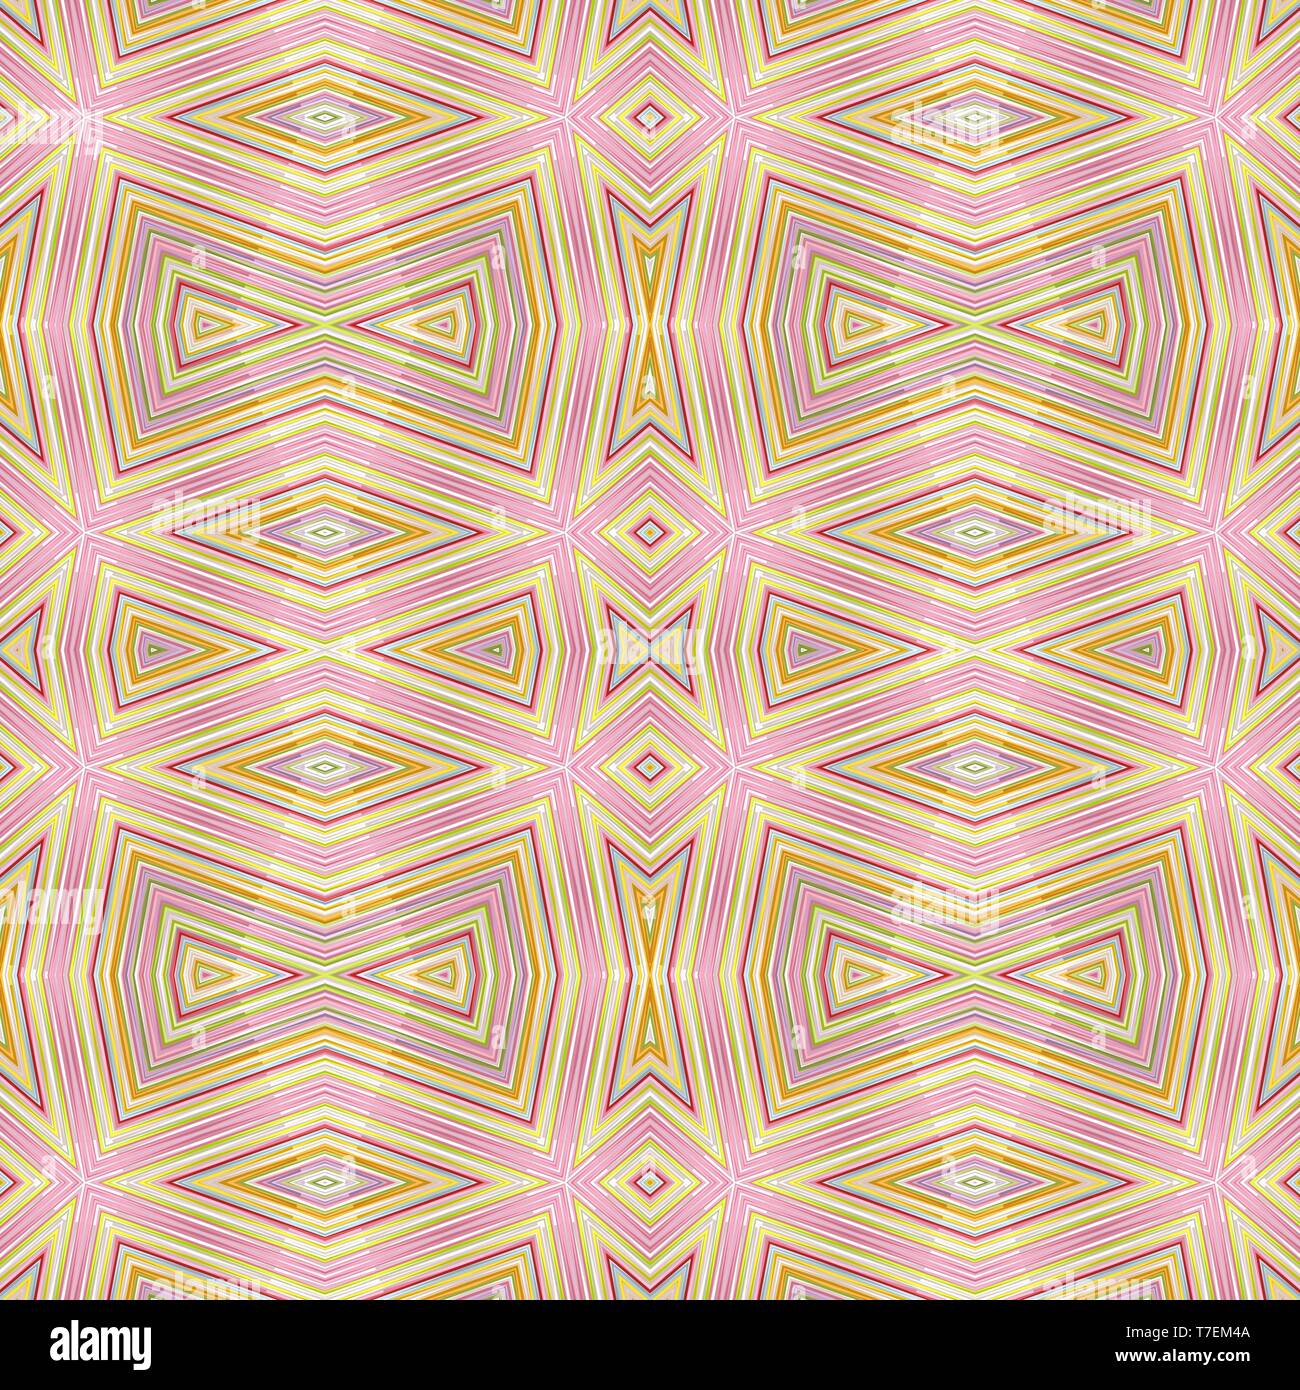 modern thistle, golden rod and pale violet red colors. repeatable shiny background pattern for graphics, wrapping paper, fashion design or web sites. Stock Photo